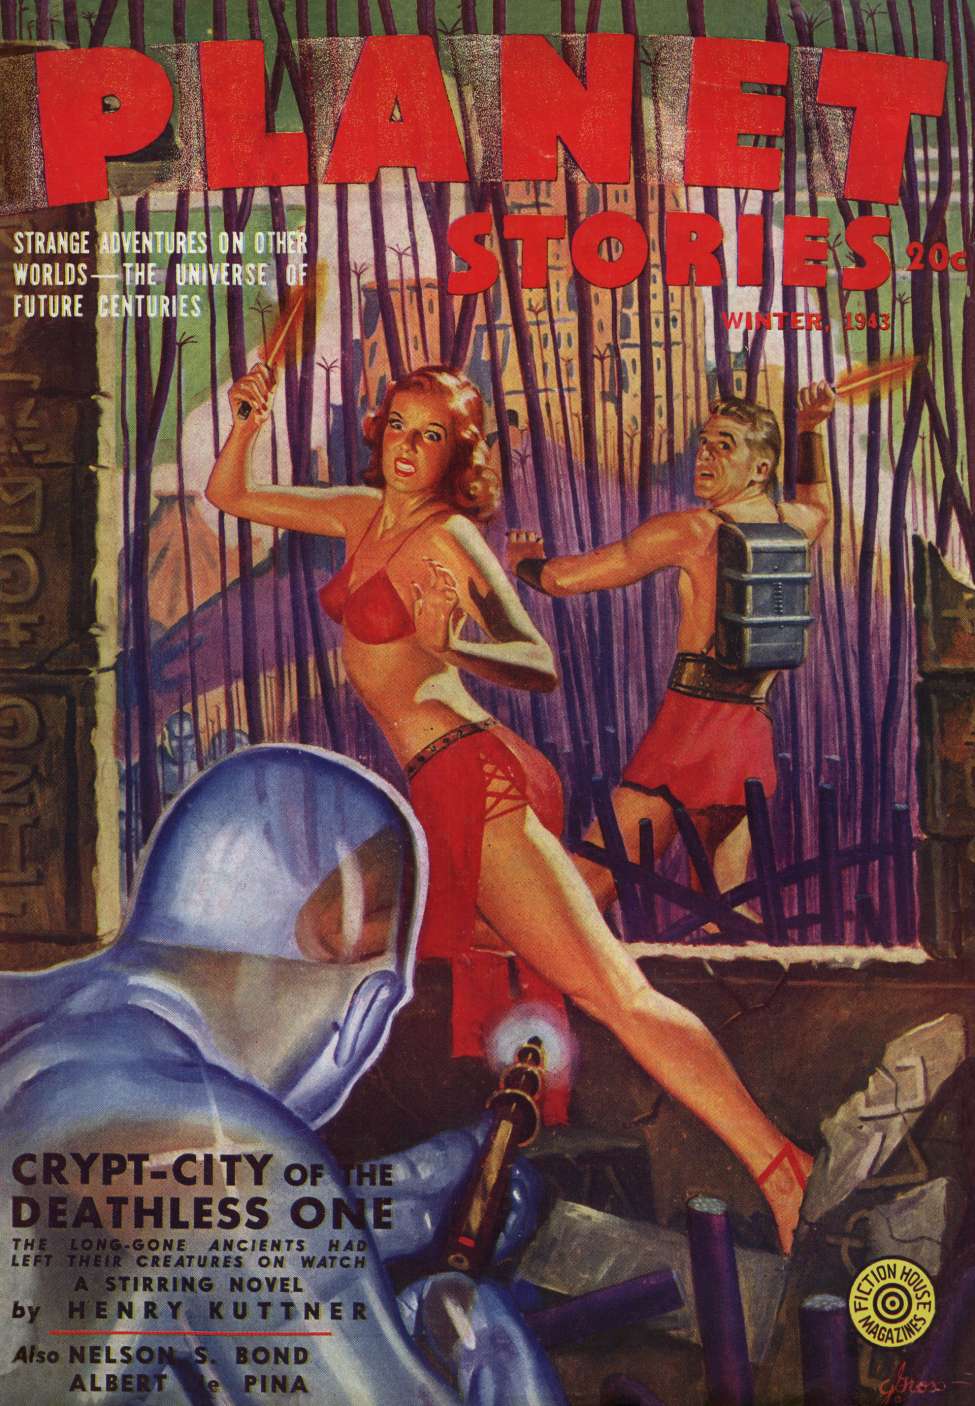 Book Cover For Planet Stories v2 5 - Crypt-City of the Deathless One - Henry Kuttner